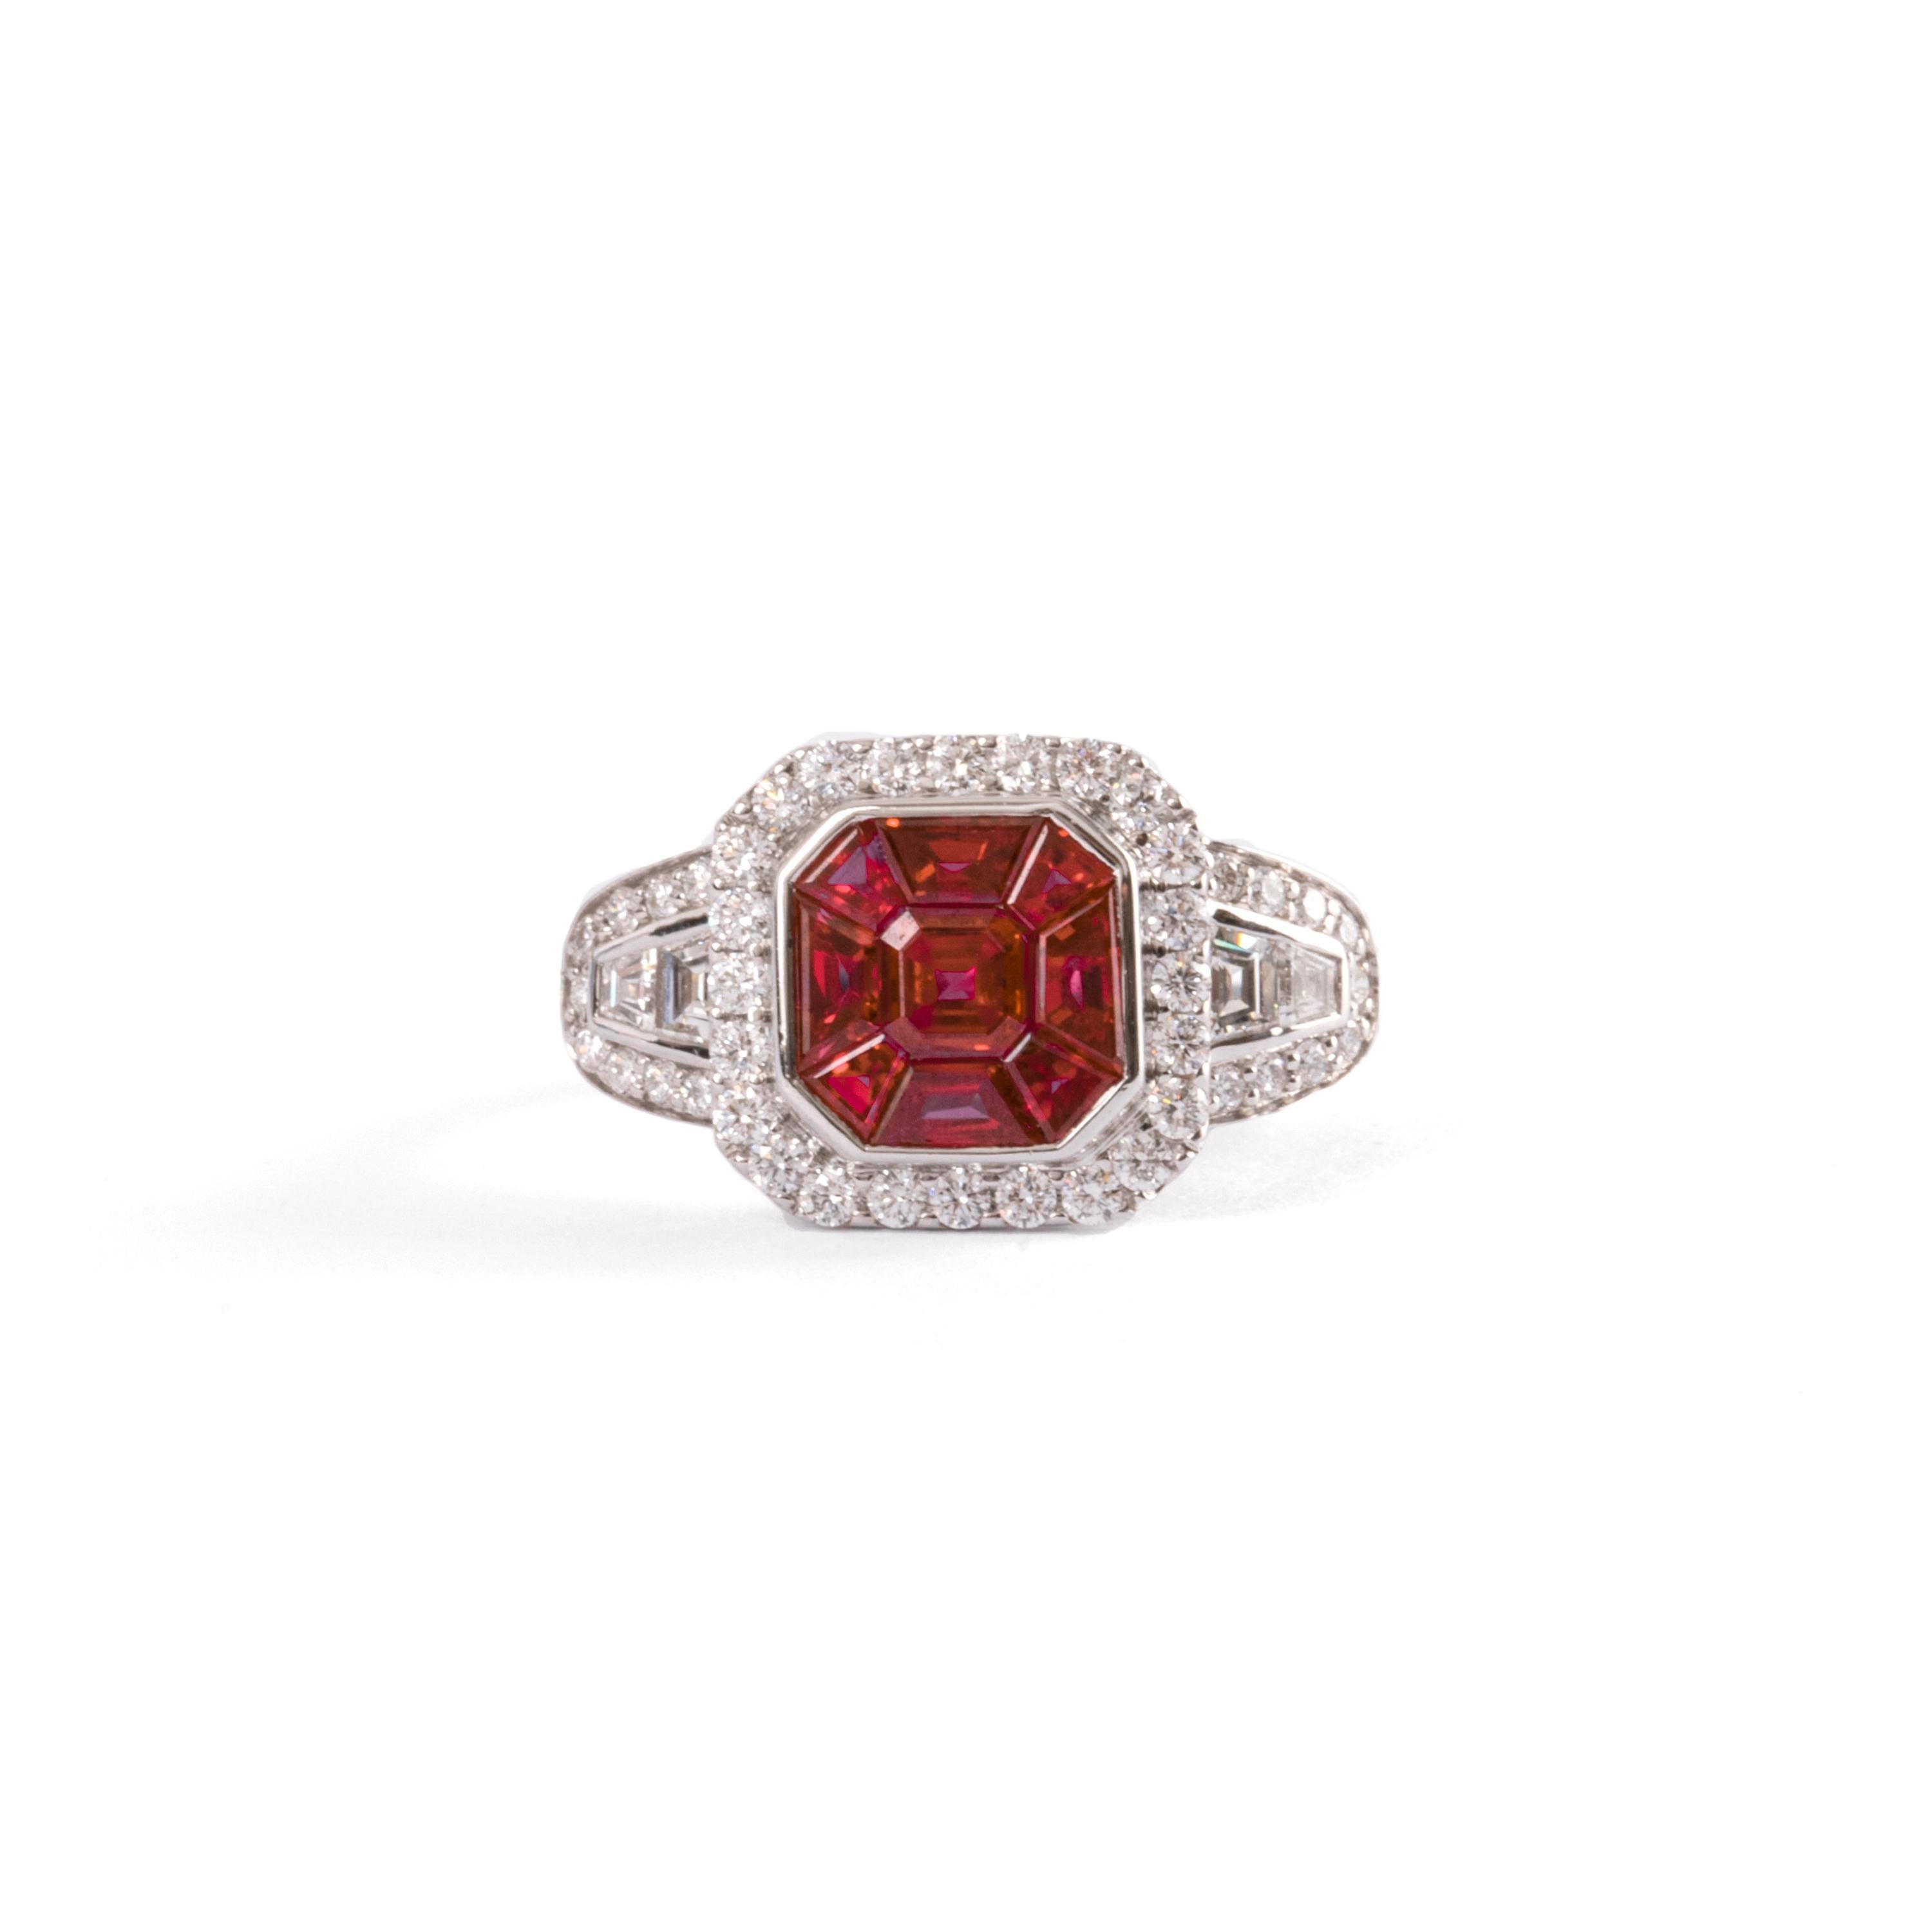 Very Special 18 Karat White Gold 1.85 Carat Rubies Carrè 0,39 Carat Brilliant and Baguette Diamonds. Perfect for giving love and passion.